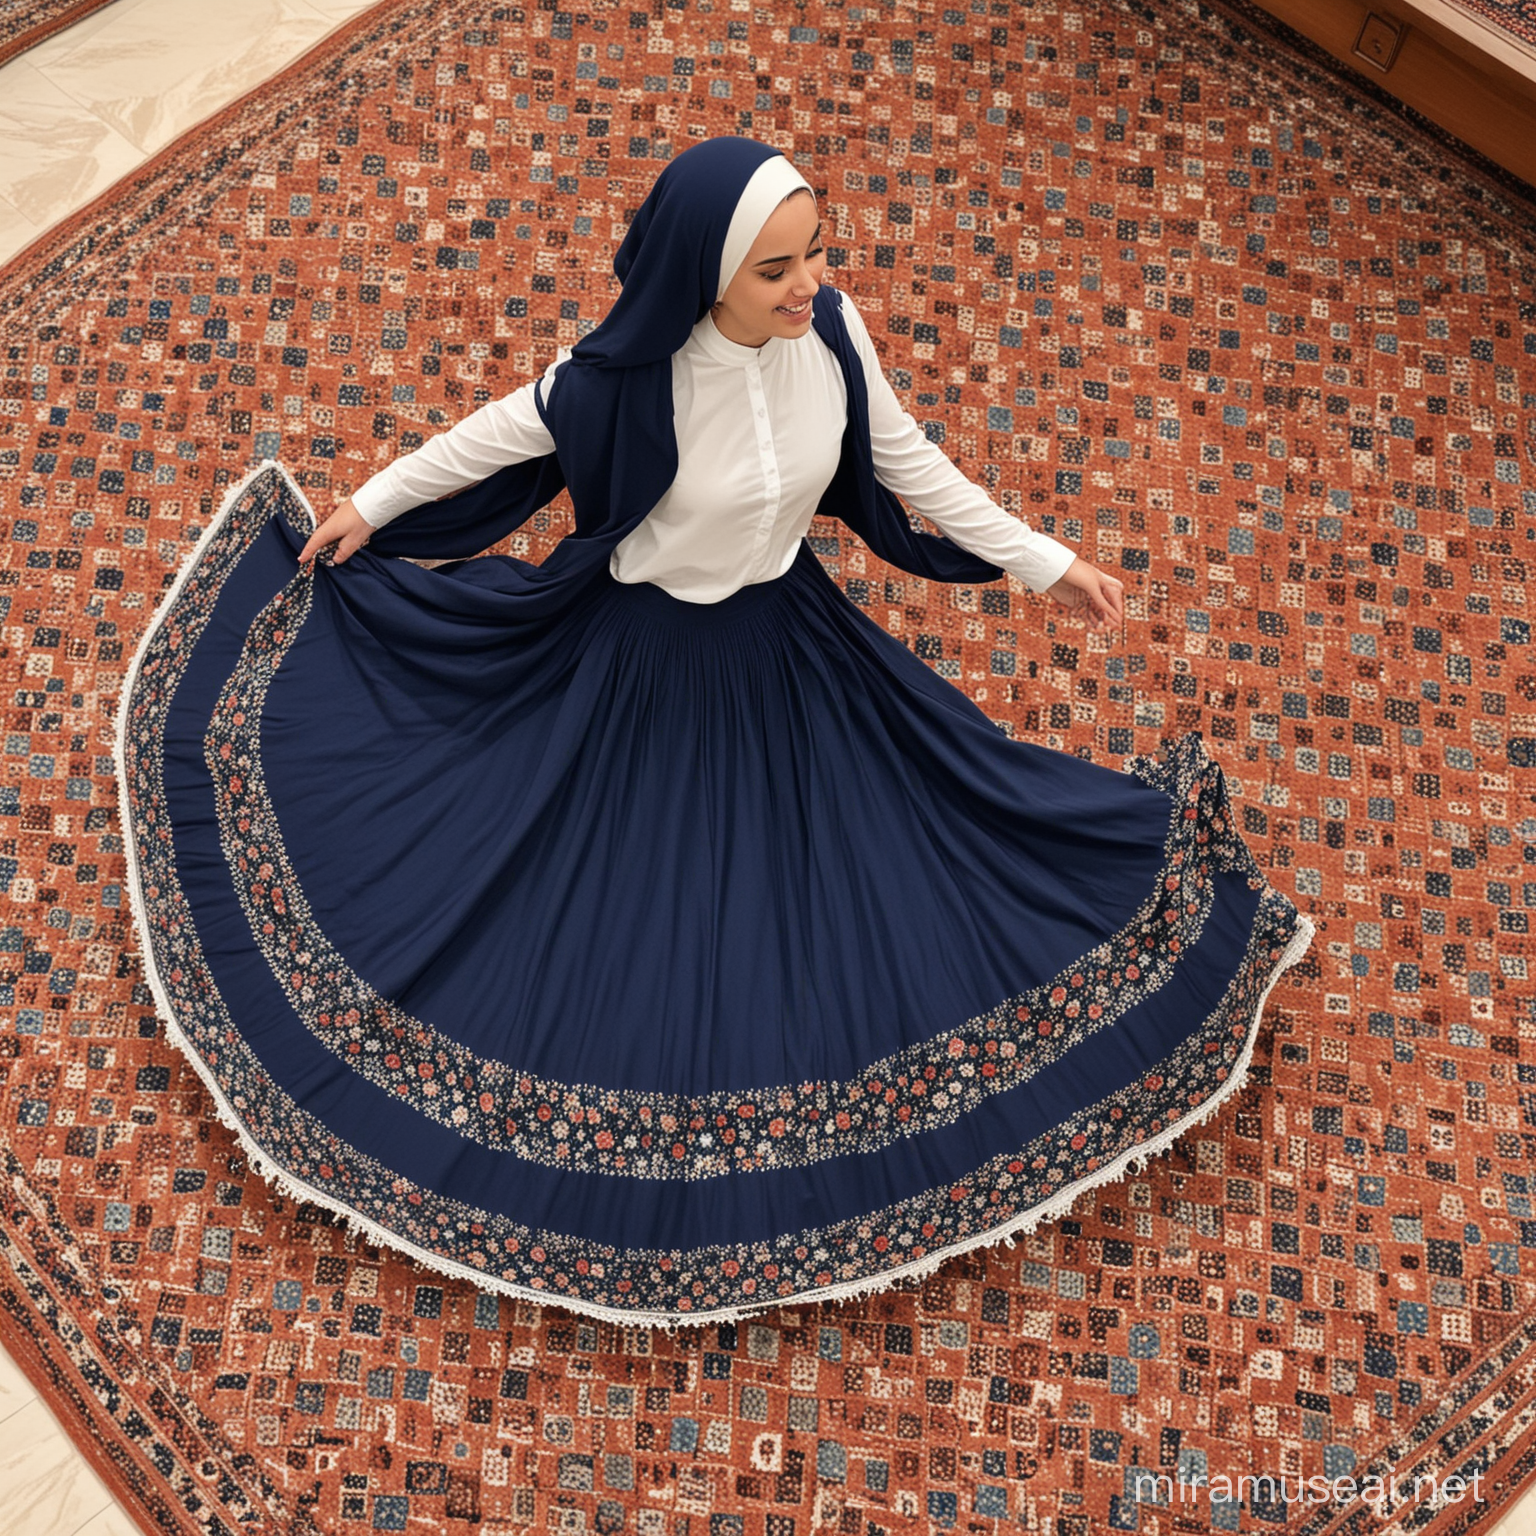 A girl wearing a hijab with a long navy blue skirt is spinning her skirt on the Iranian carpet


